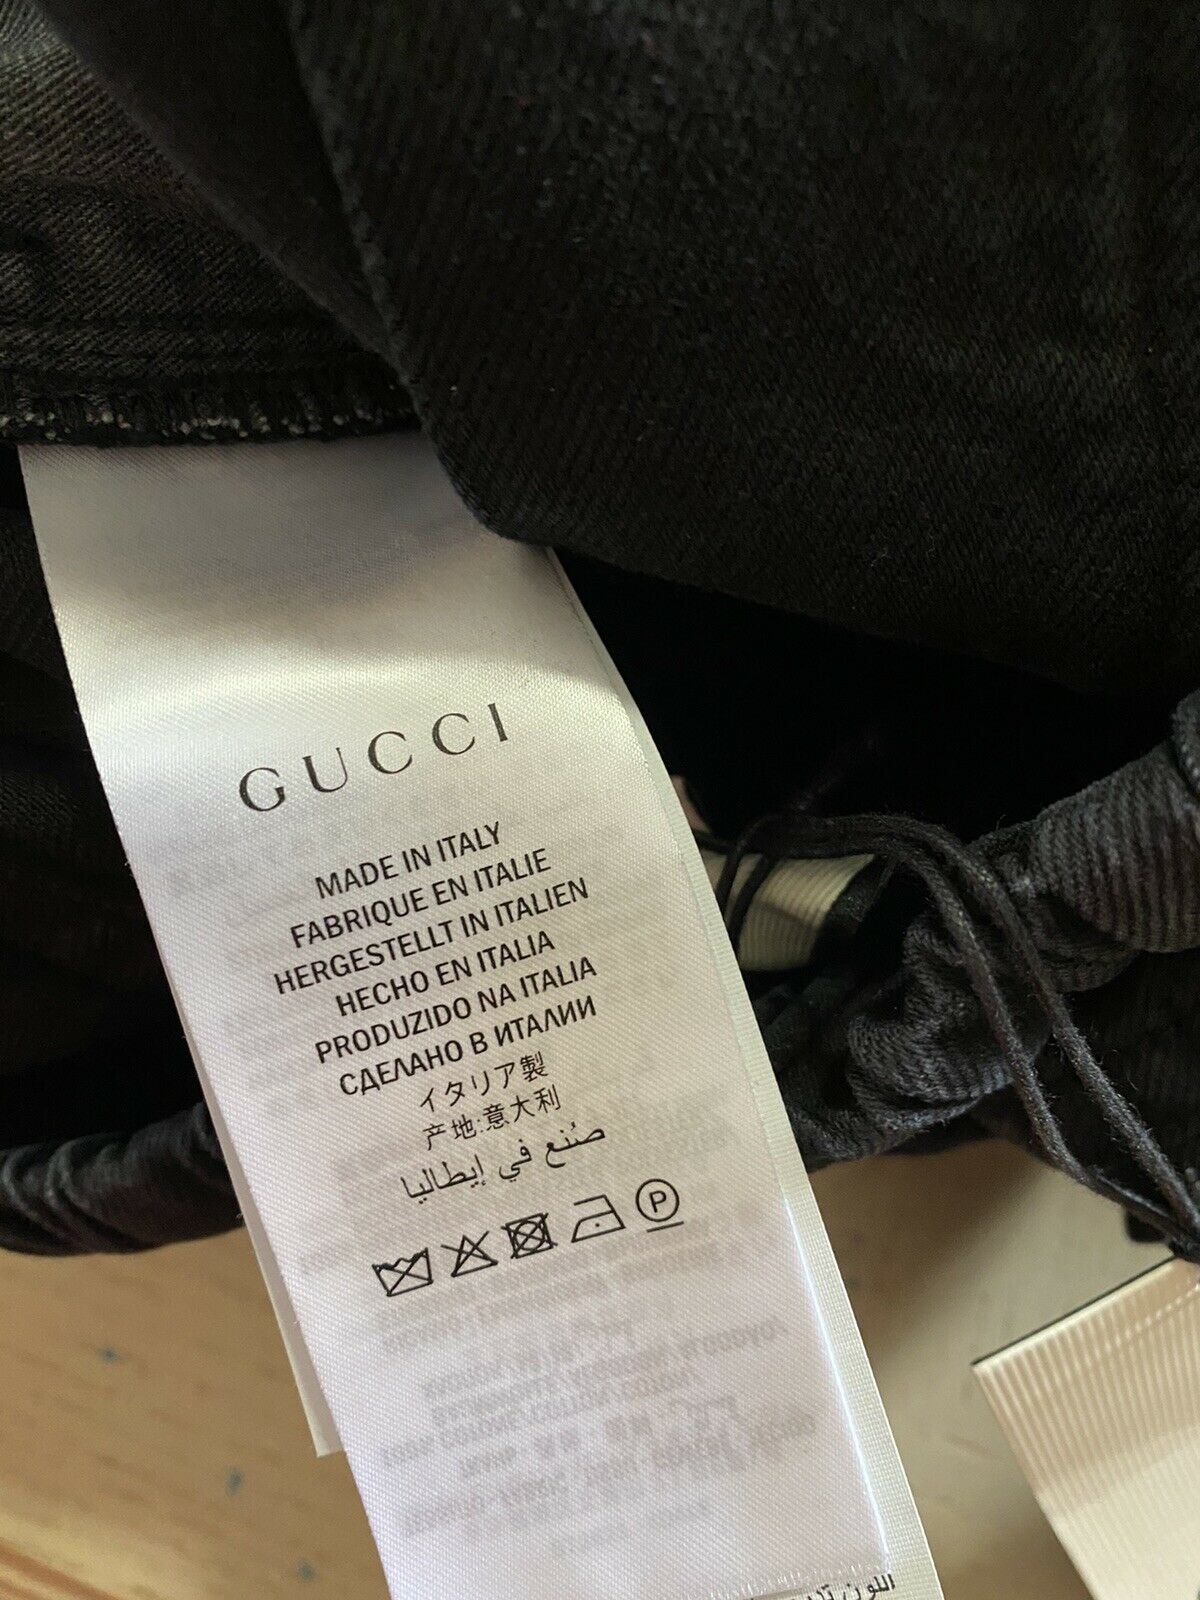 NWT $950 Gucci Mens Washed Cotton Short Jeans Pants Black Size 34 Italy